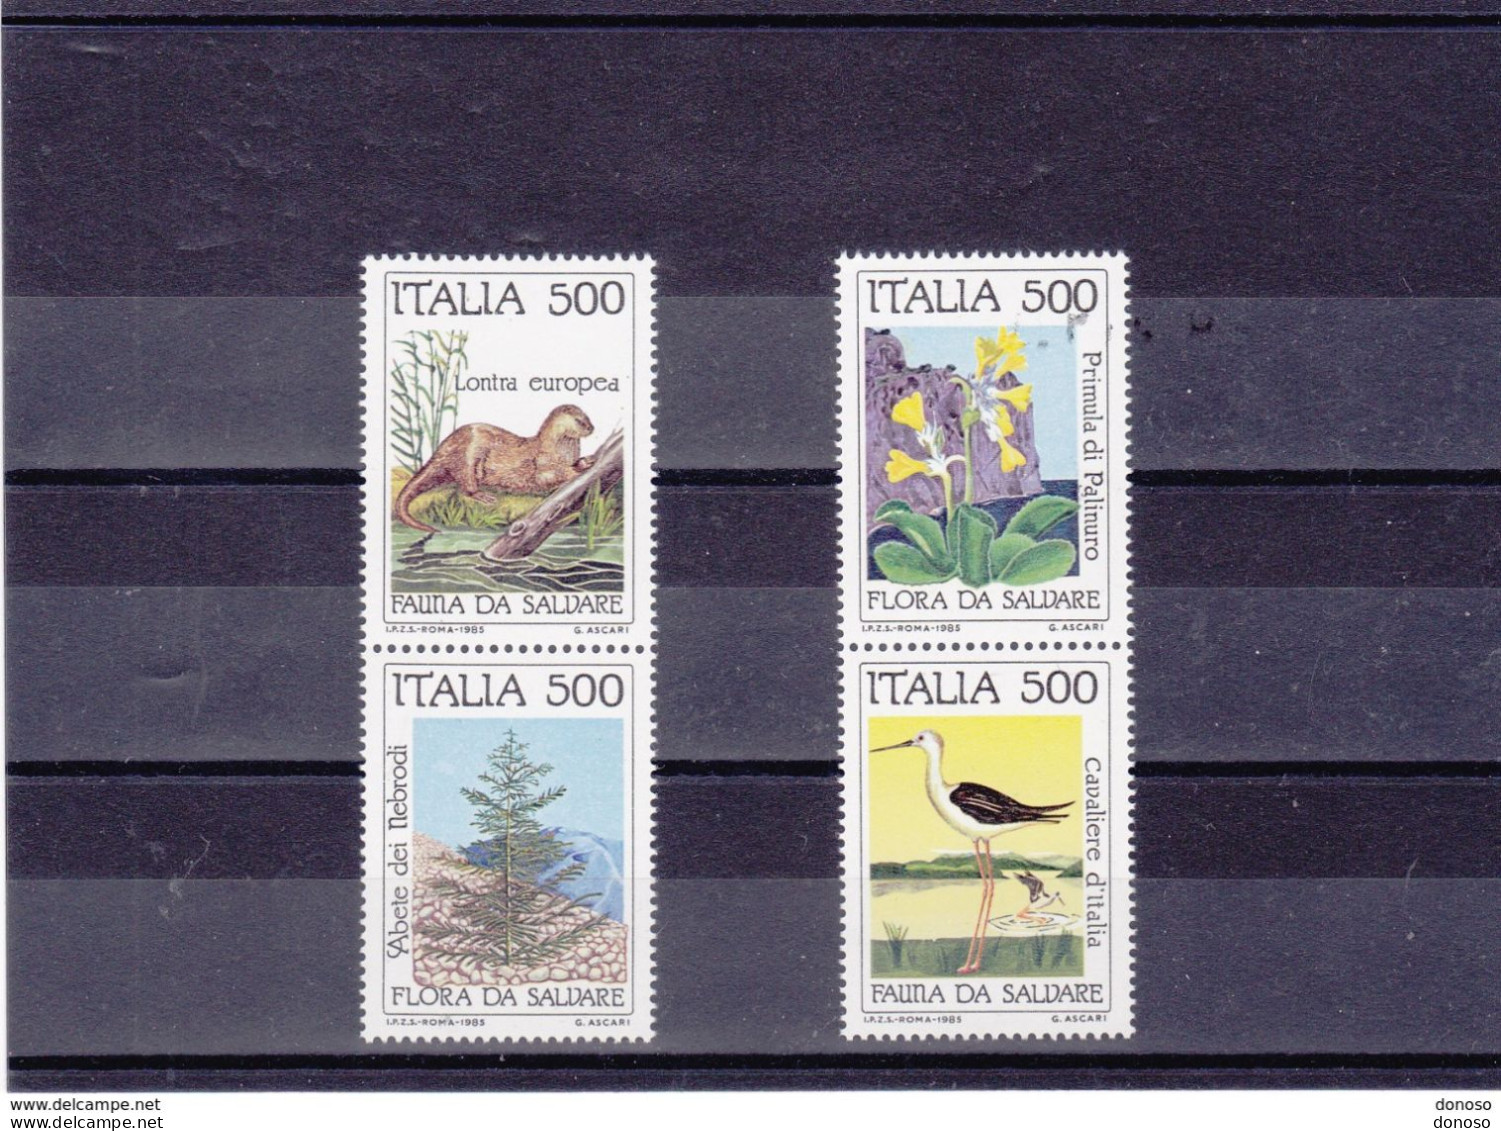 ITALIE 1985 Loutre, échassier, Sapin, Primevère Yvert 1658-1661, Michel 1926-1929 NEUF** MNH Cote Yv: 12 Euros - 1981-90: Mint/hinged